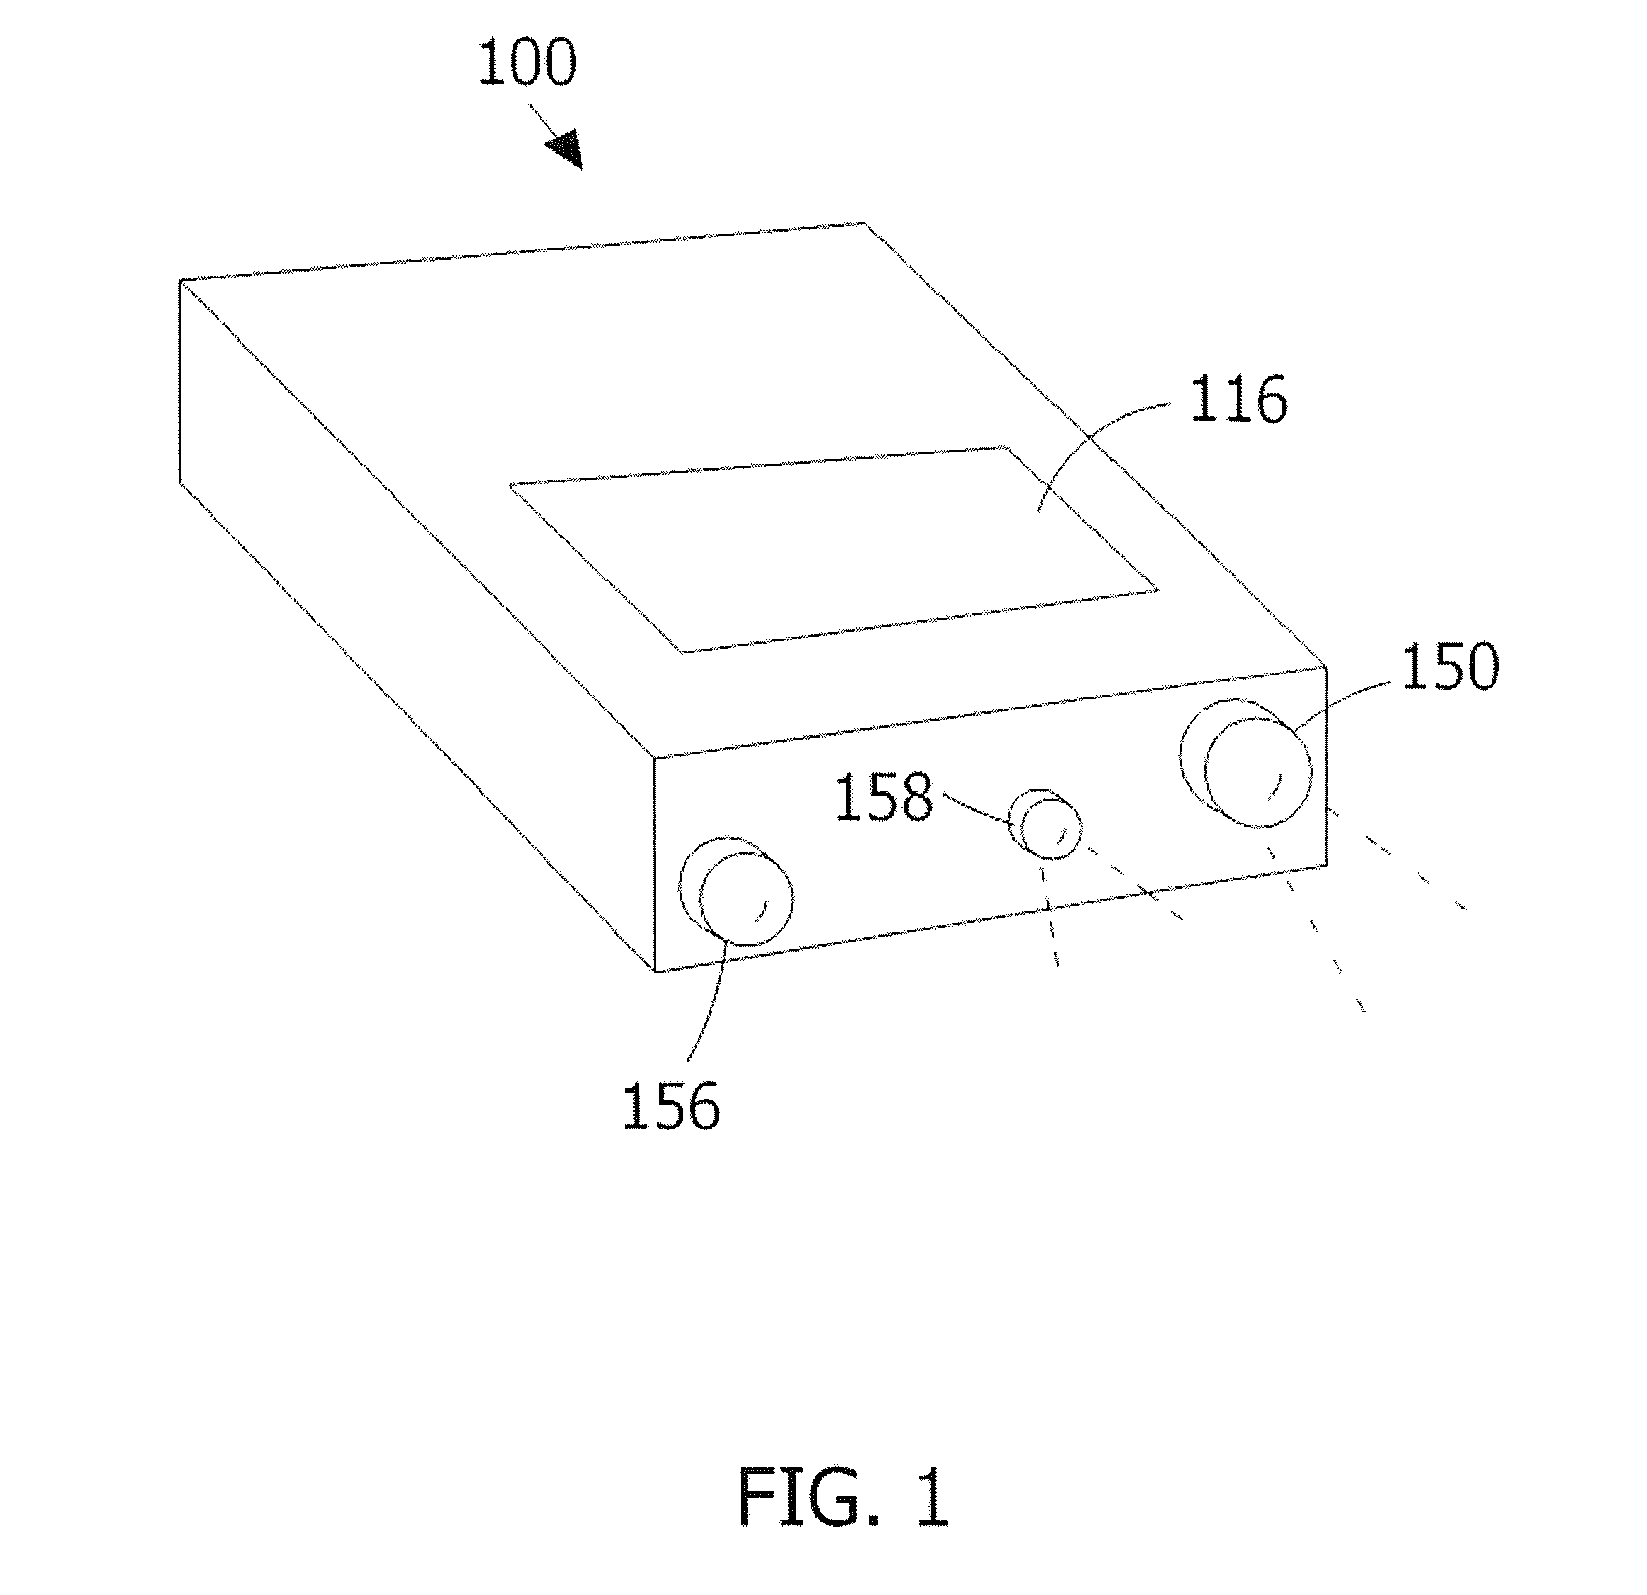 Connecting video objects and physical objects for handheld projectors